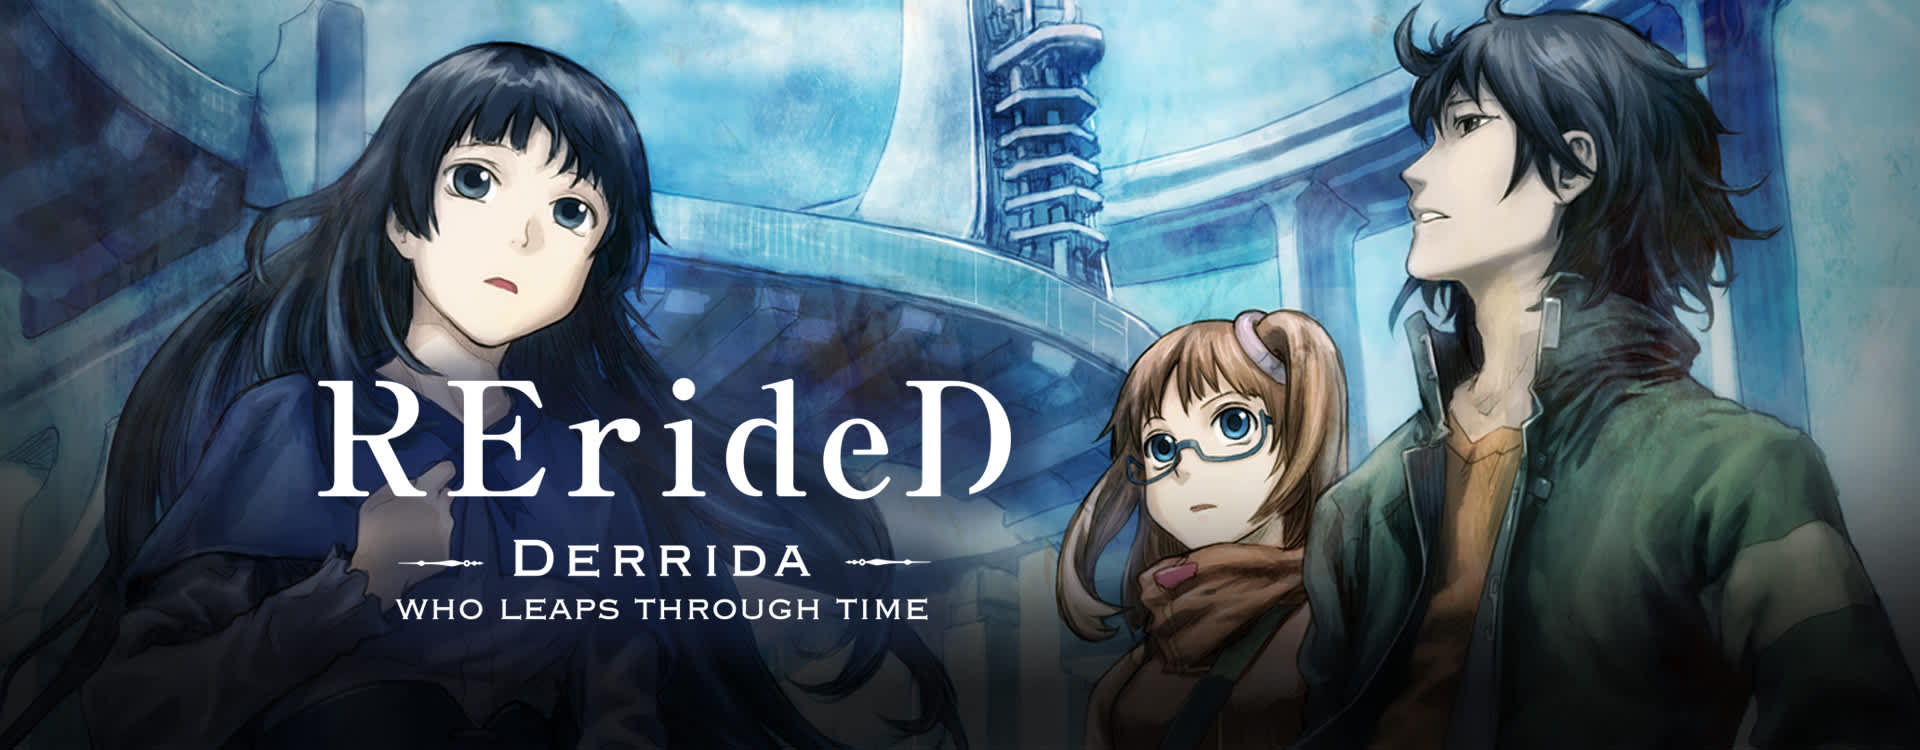 RErideD - Derrida, who leaps through time (English Dub) The Place He  Awakened - Watch on Crunchyroll